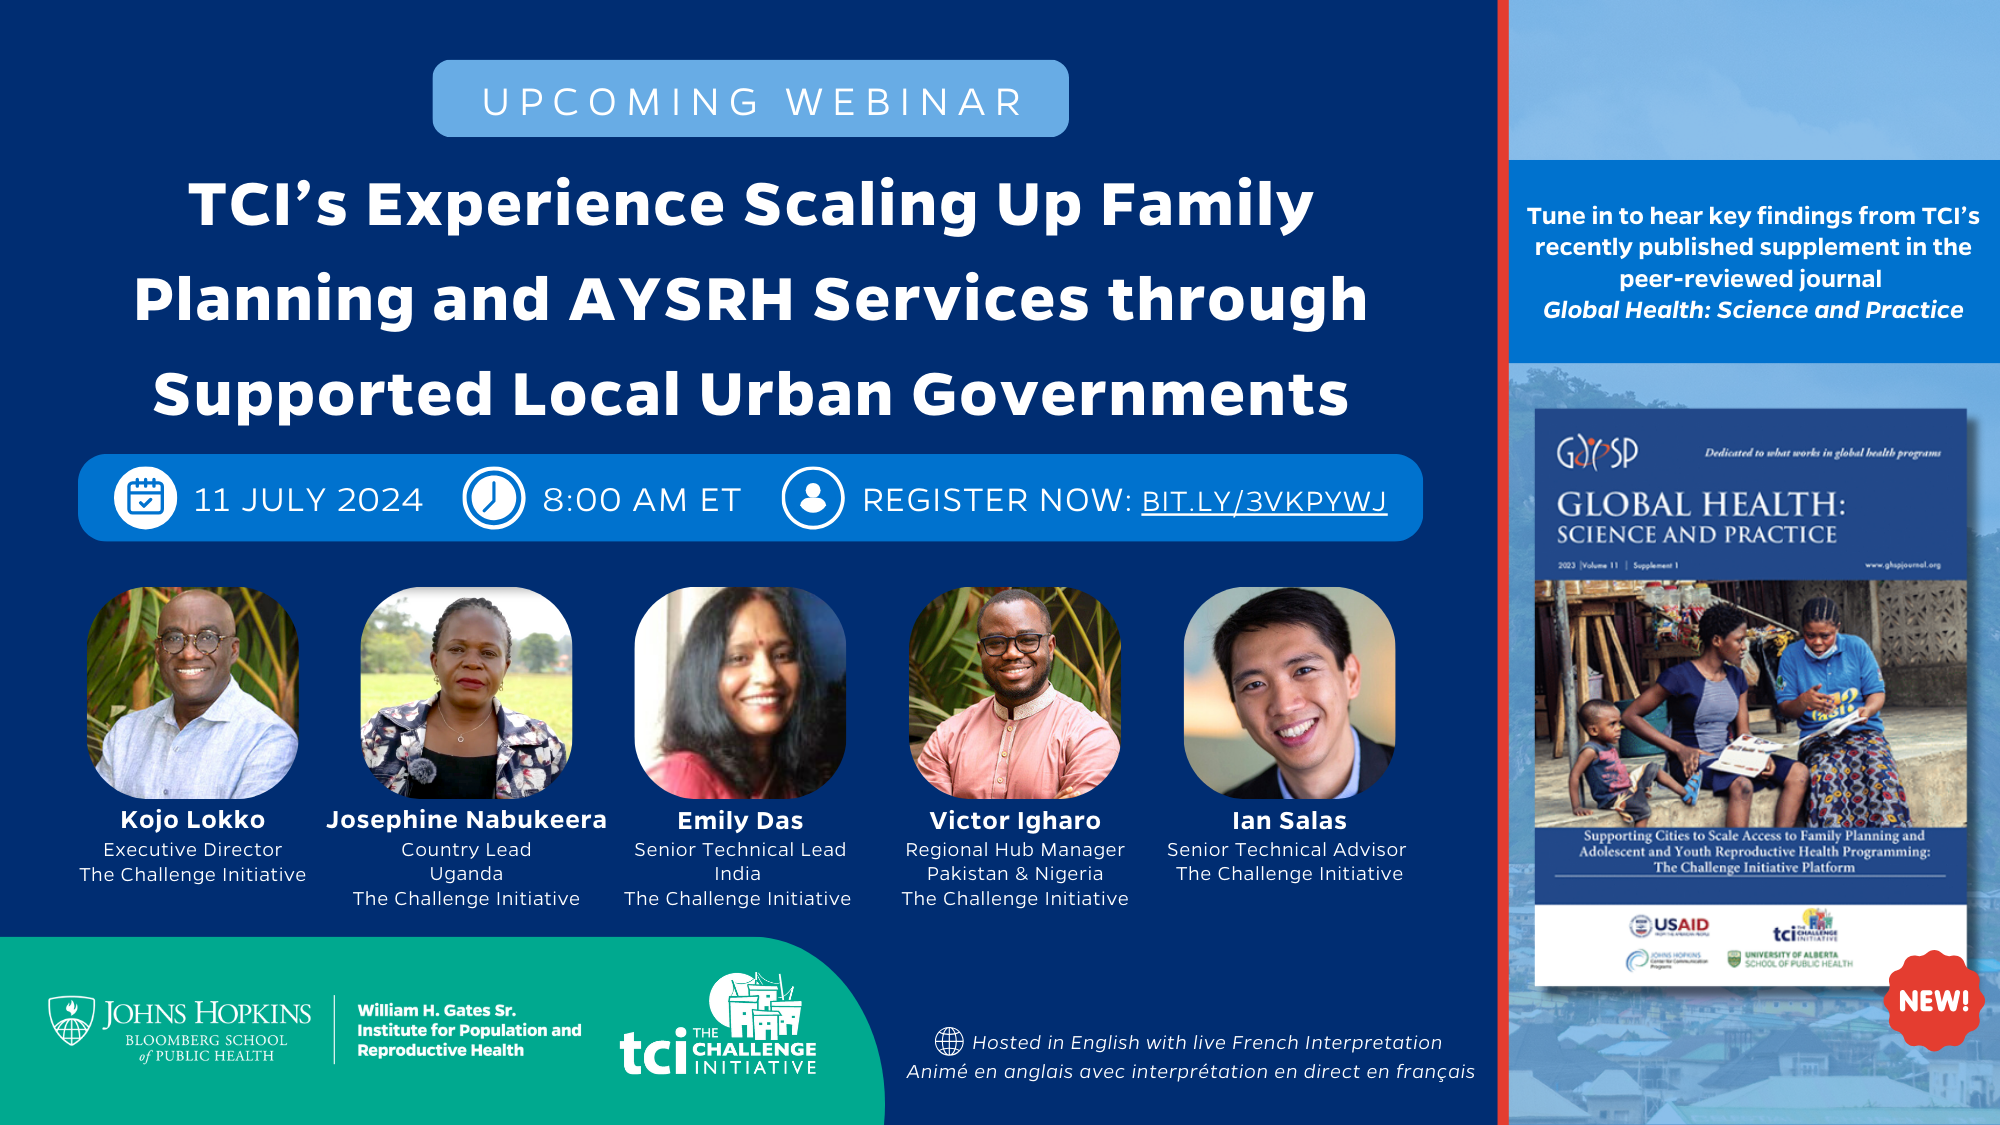 Watch Now: TCI’s Experience Scaling Up Family Planning and AYSRH Services through Supported Local Urban Governments